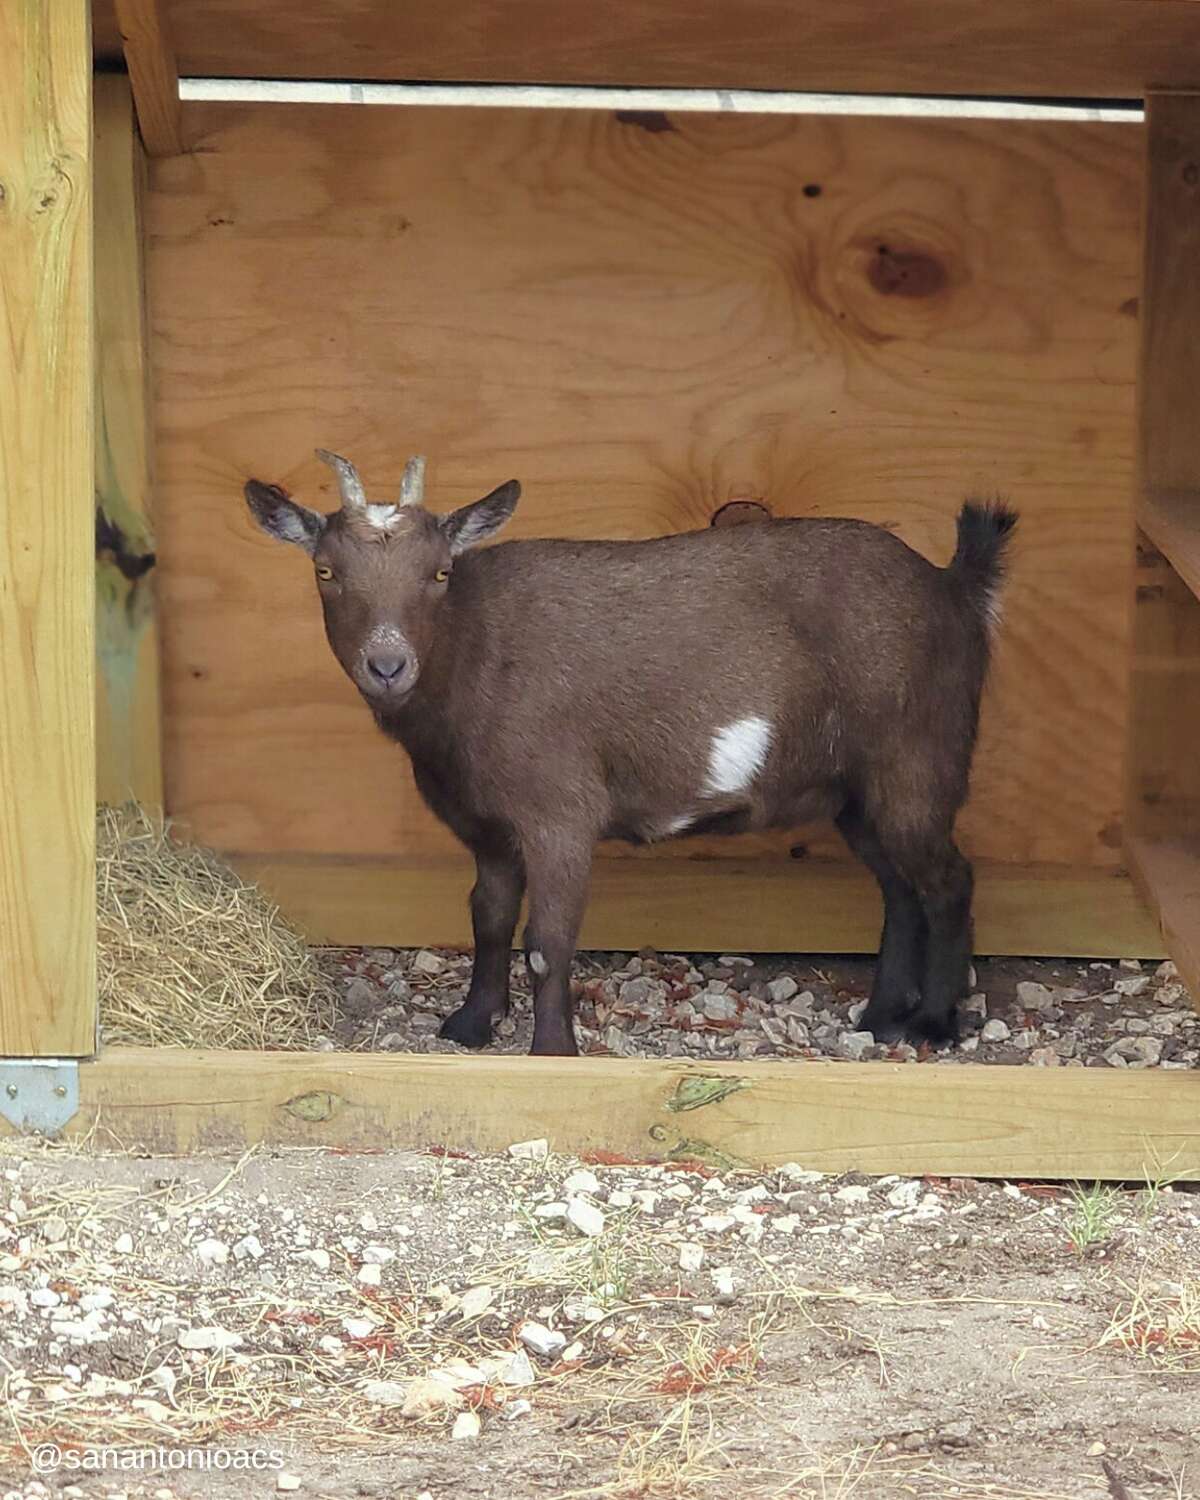 San Antonio's animal care services took in a cute brown goat that was found roaming a local yard.